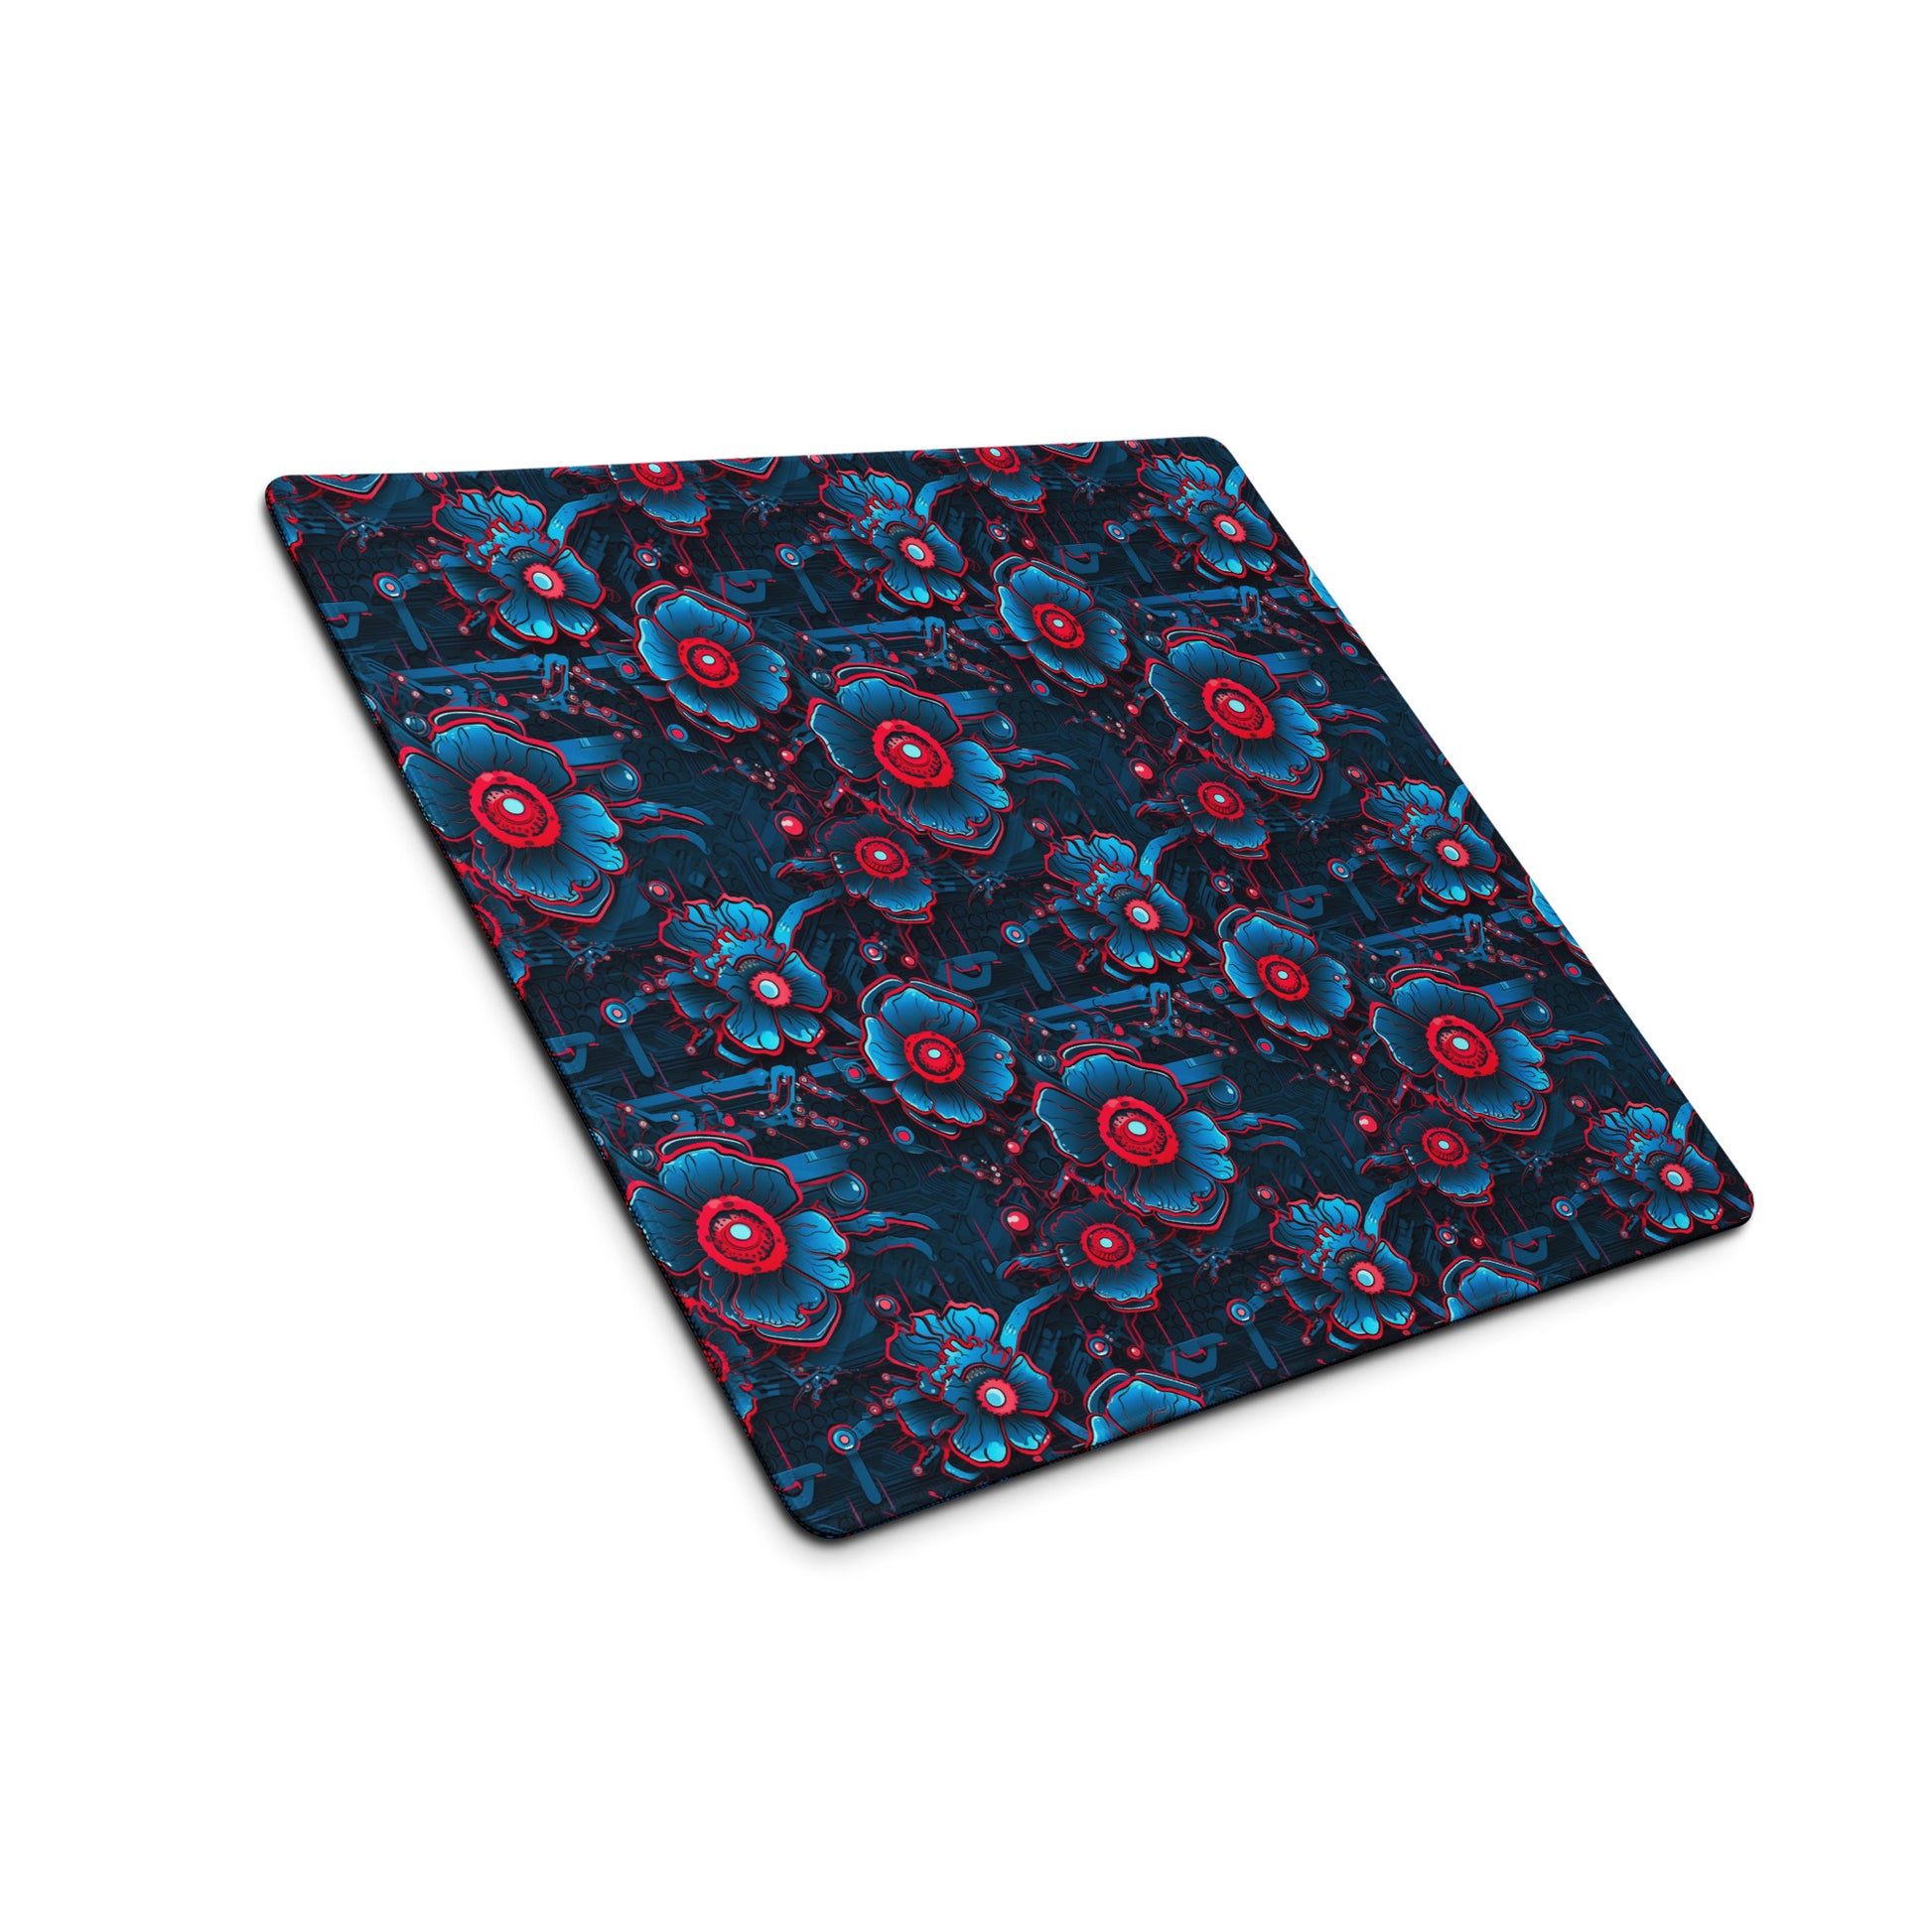 A 18" x 16" desk pad with a blue and red robotic floral pattern sitting at an angle.